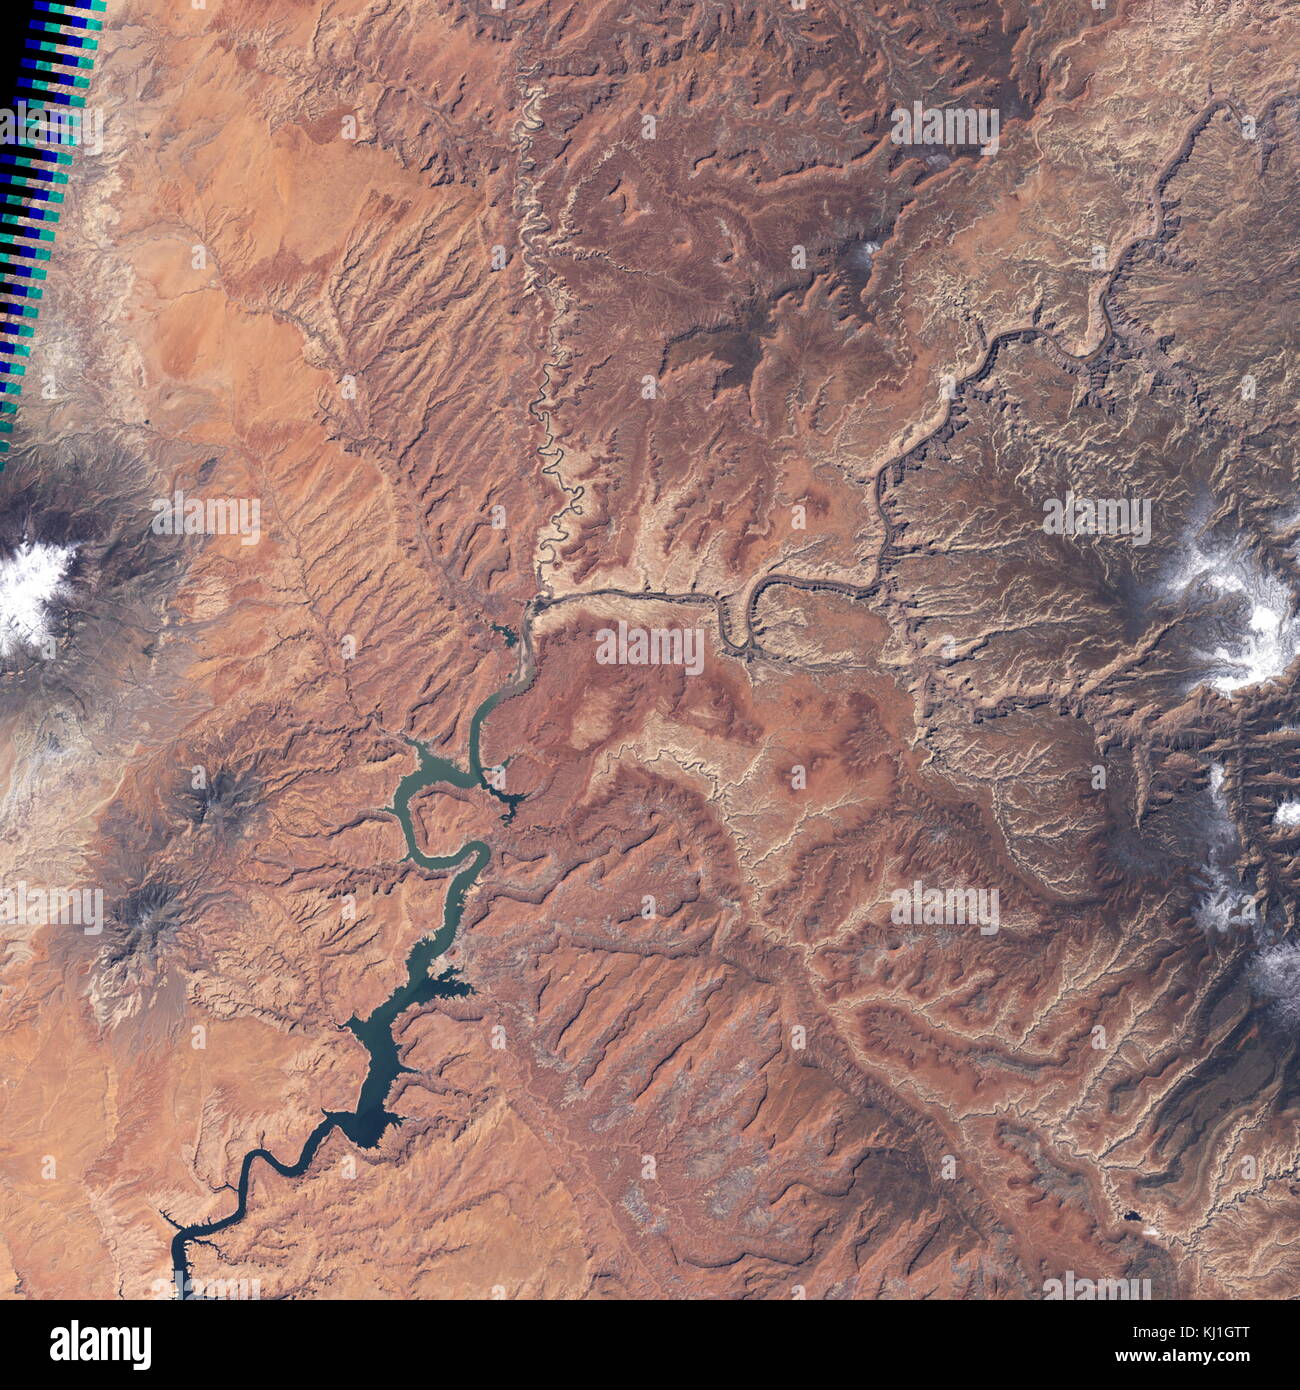 Lake Powell, is a reservoir on the Colorado River, straddling the border between Utah and Arizona (most of it, along with Rainbow Bridge, is in Utah). It is the second largest man-made reservoir by maximum water capacity in the United States behind Lake Mead. Satellite image, taken in 2004 Stock Photo